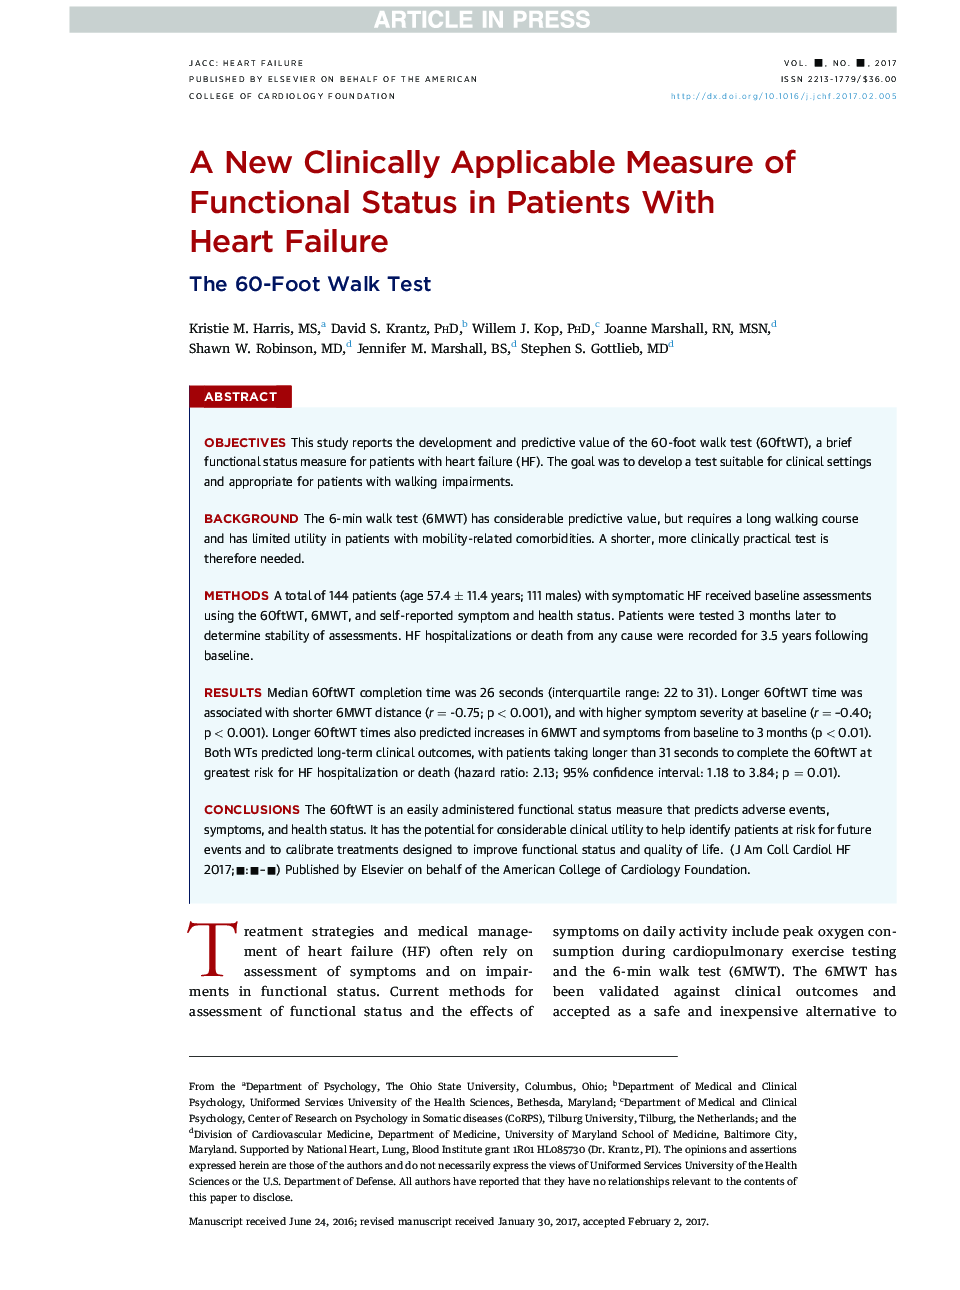 A New Clinically Applicable Measure of FunctionalÂ Status in Patients With HeartÂ Failure